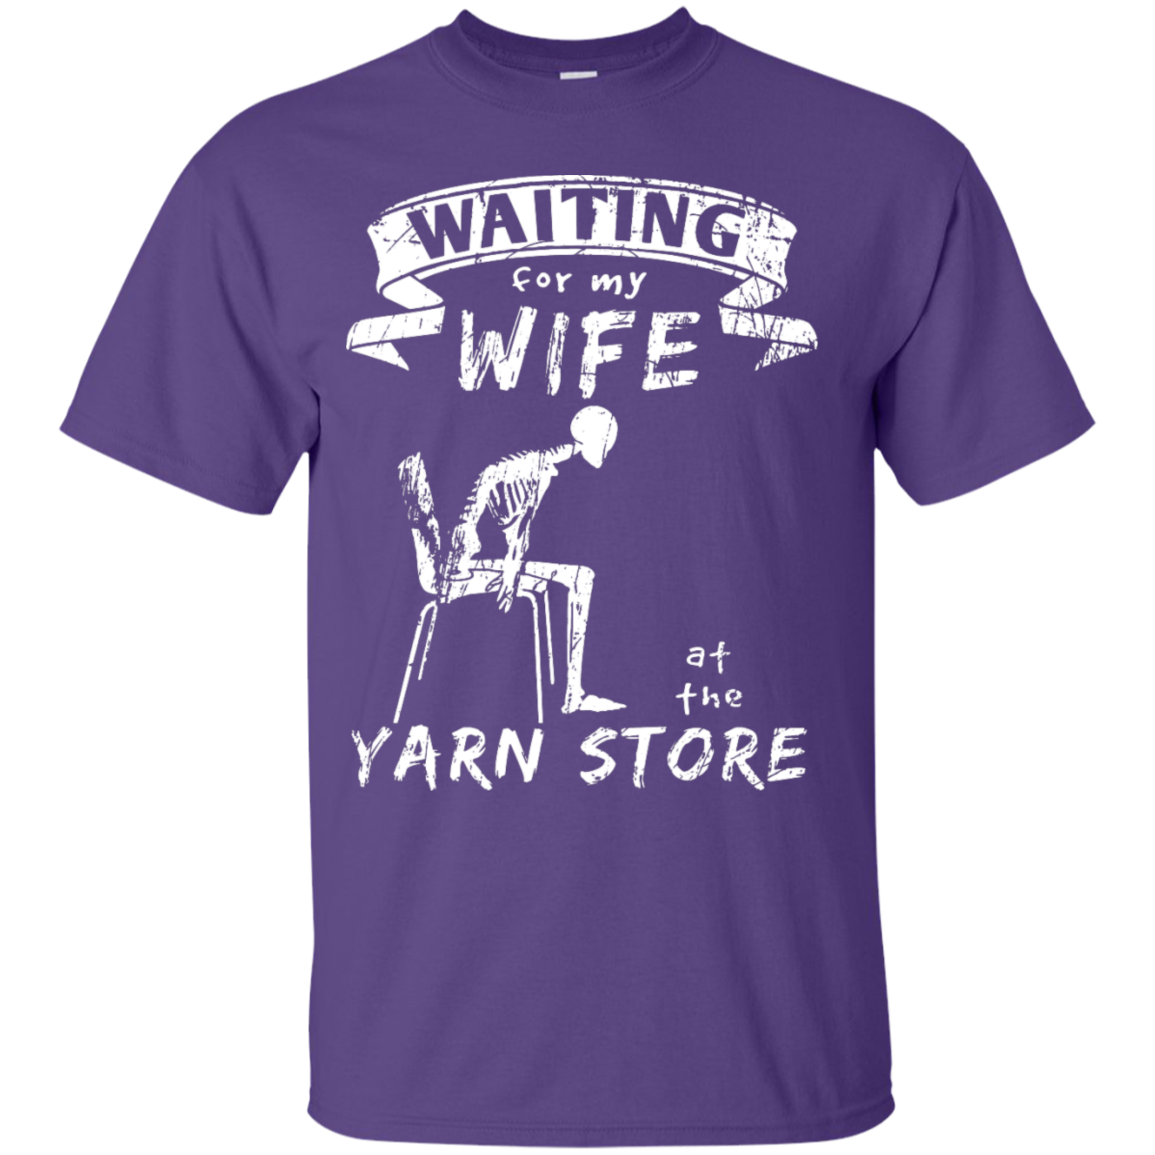 Waiting at the Yarn Store Men's and Unisex T-Shirts - Crafter4Life - 4